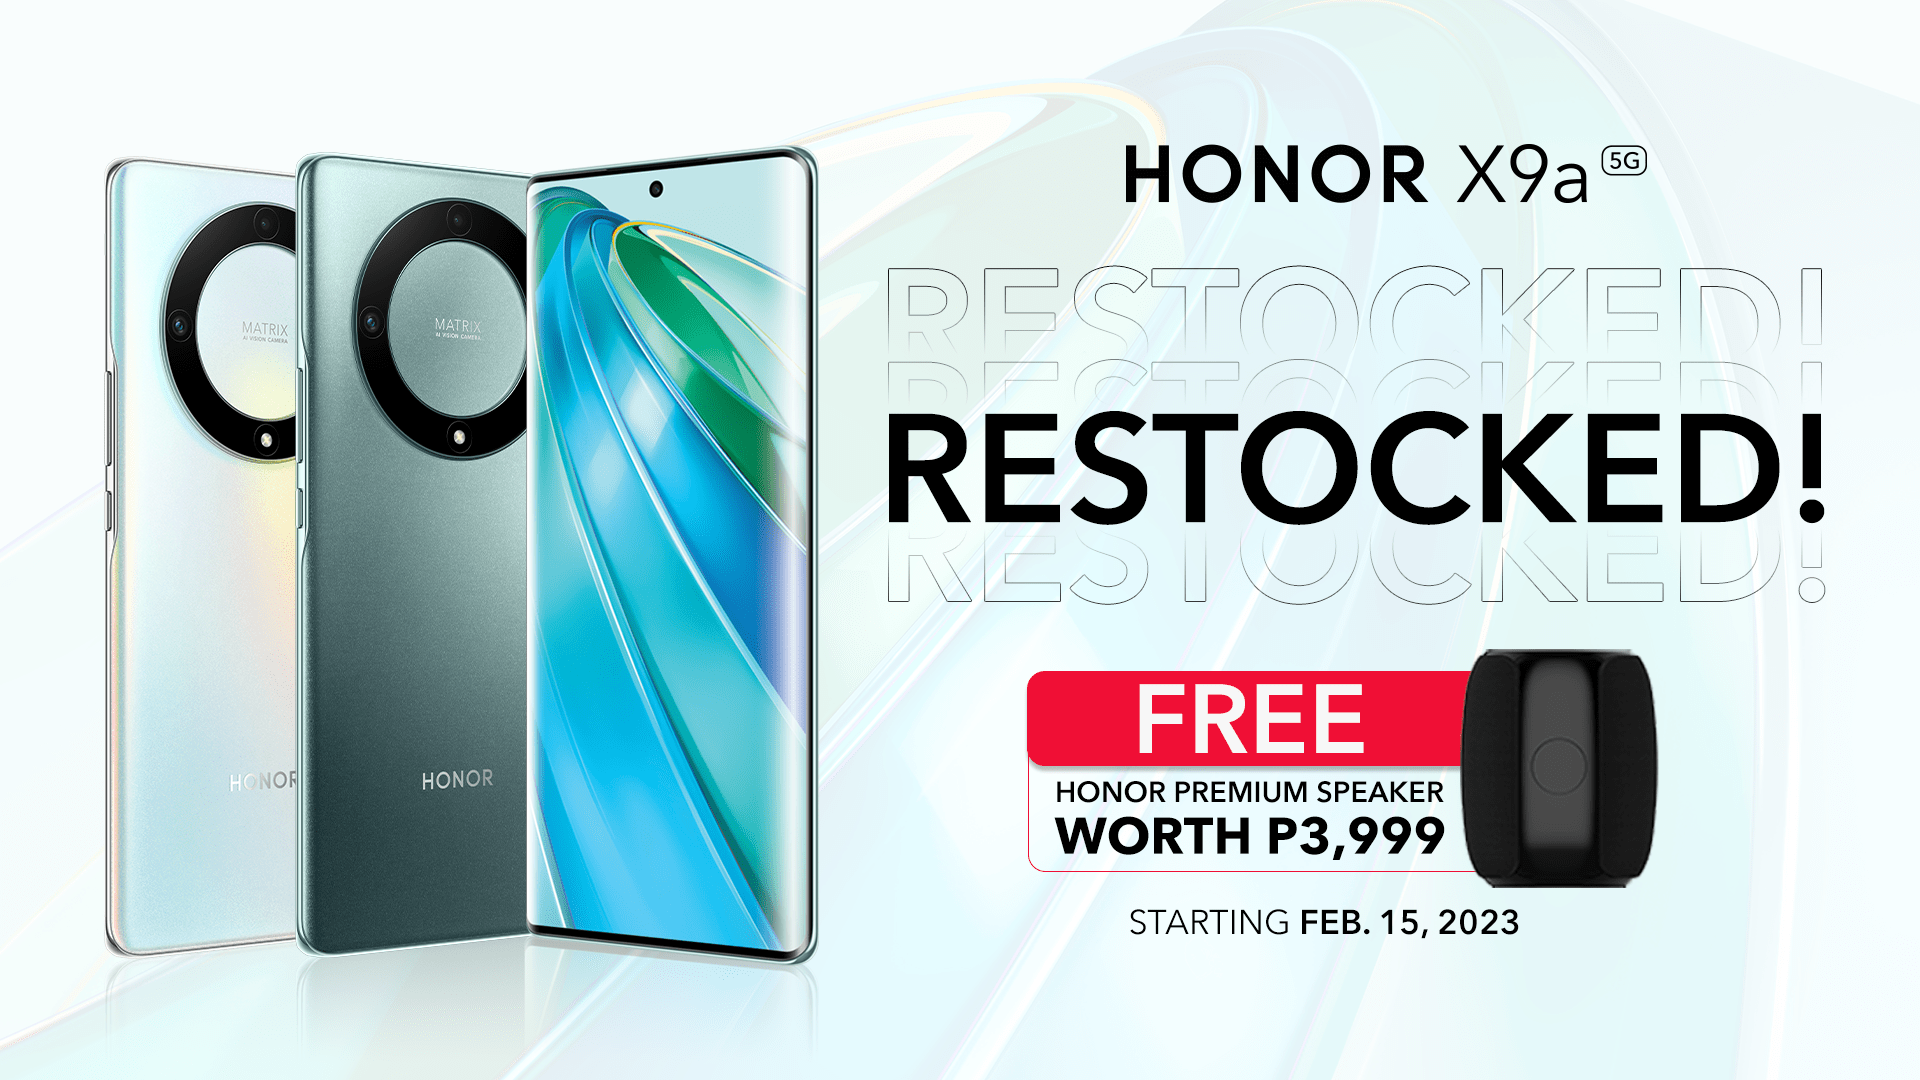 Main KV - HONOR X9a 5G gets retsocked for the second time